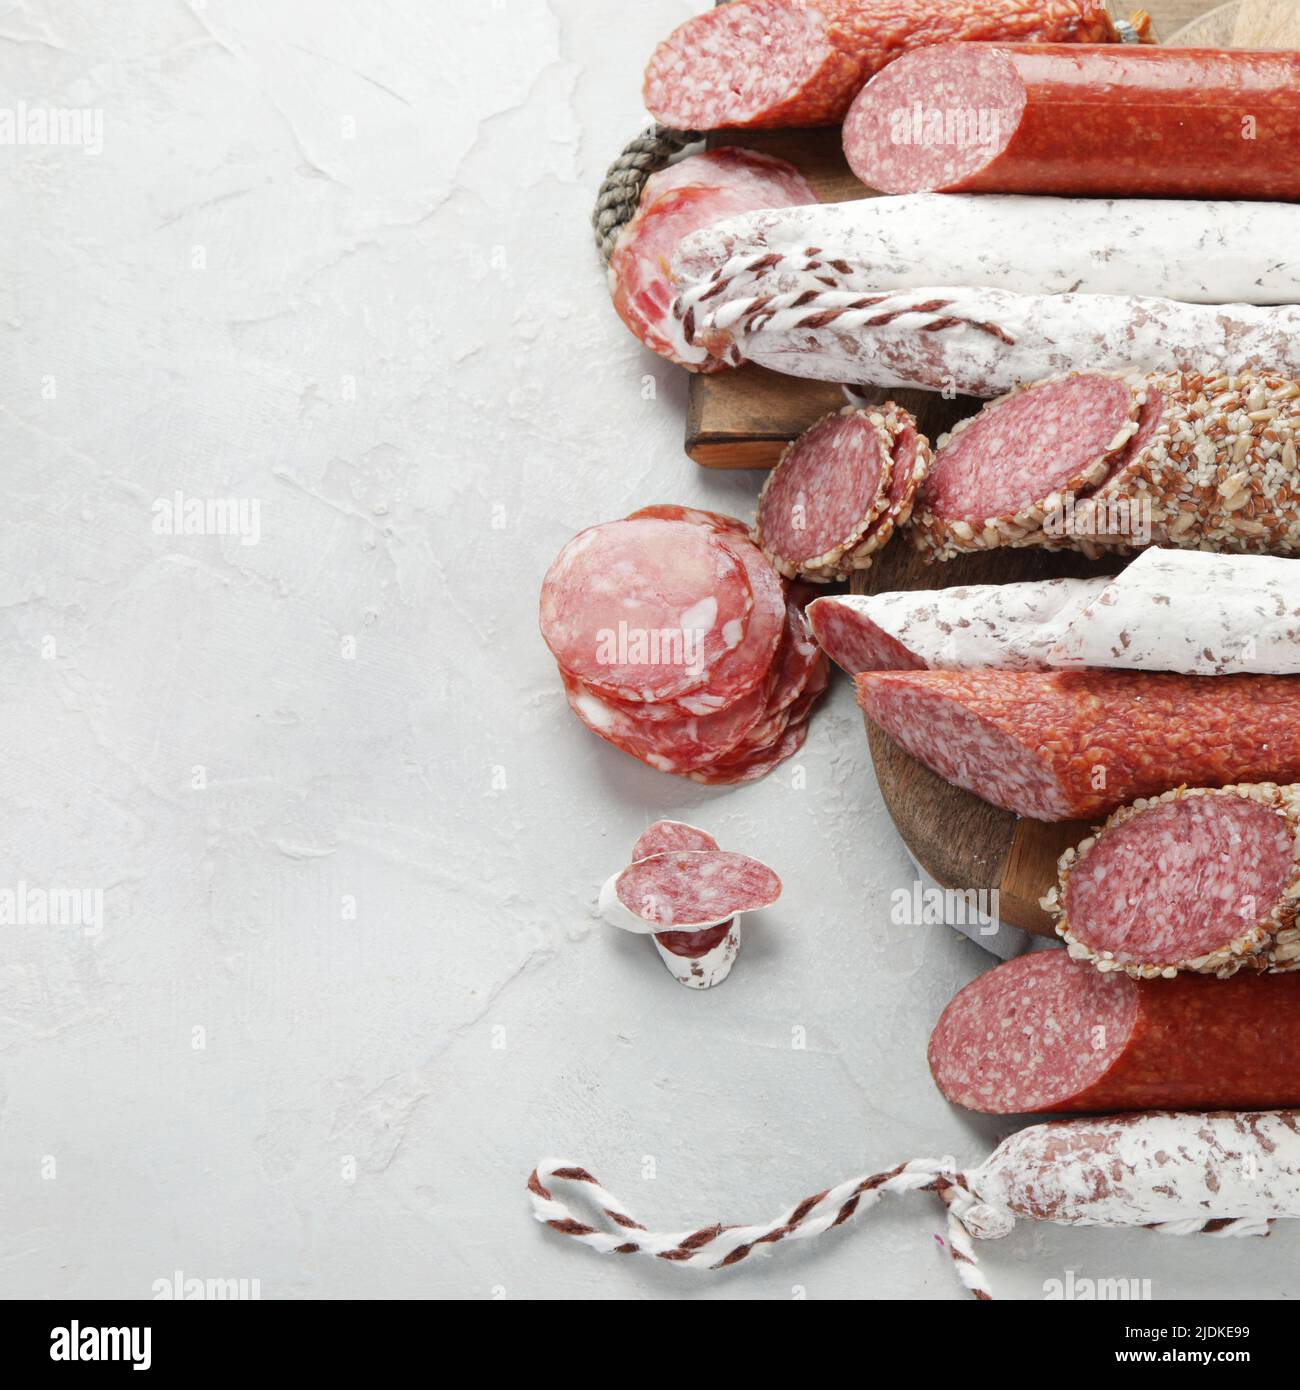 Sausages salami assortment on light background. Meat product made of finely chopped and seasoned meat. Flat lay, top view, copy space Stock Photo